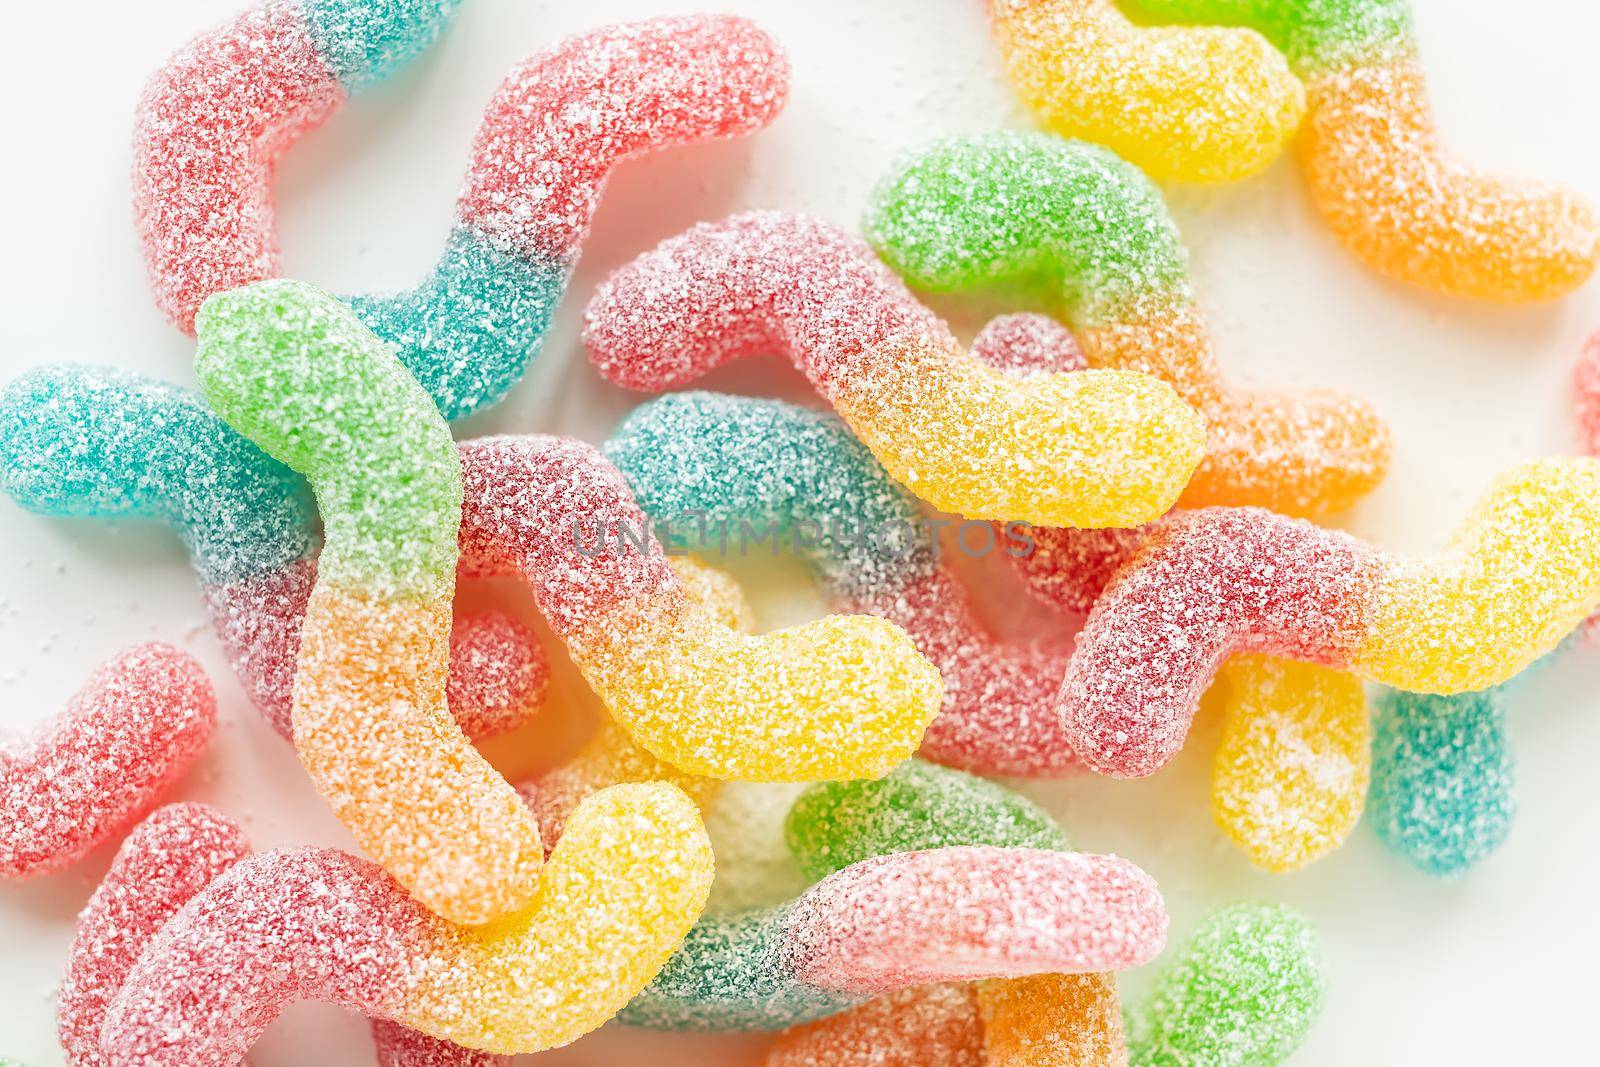 Colorful tasty jelly candies on a white background, top view